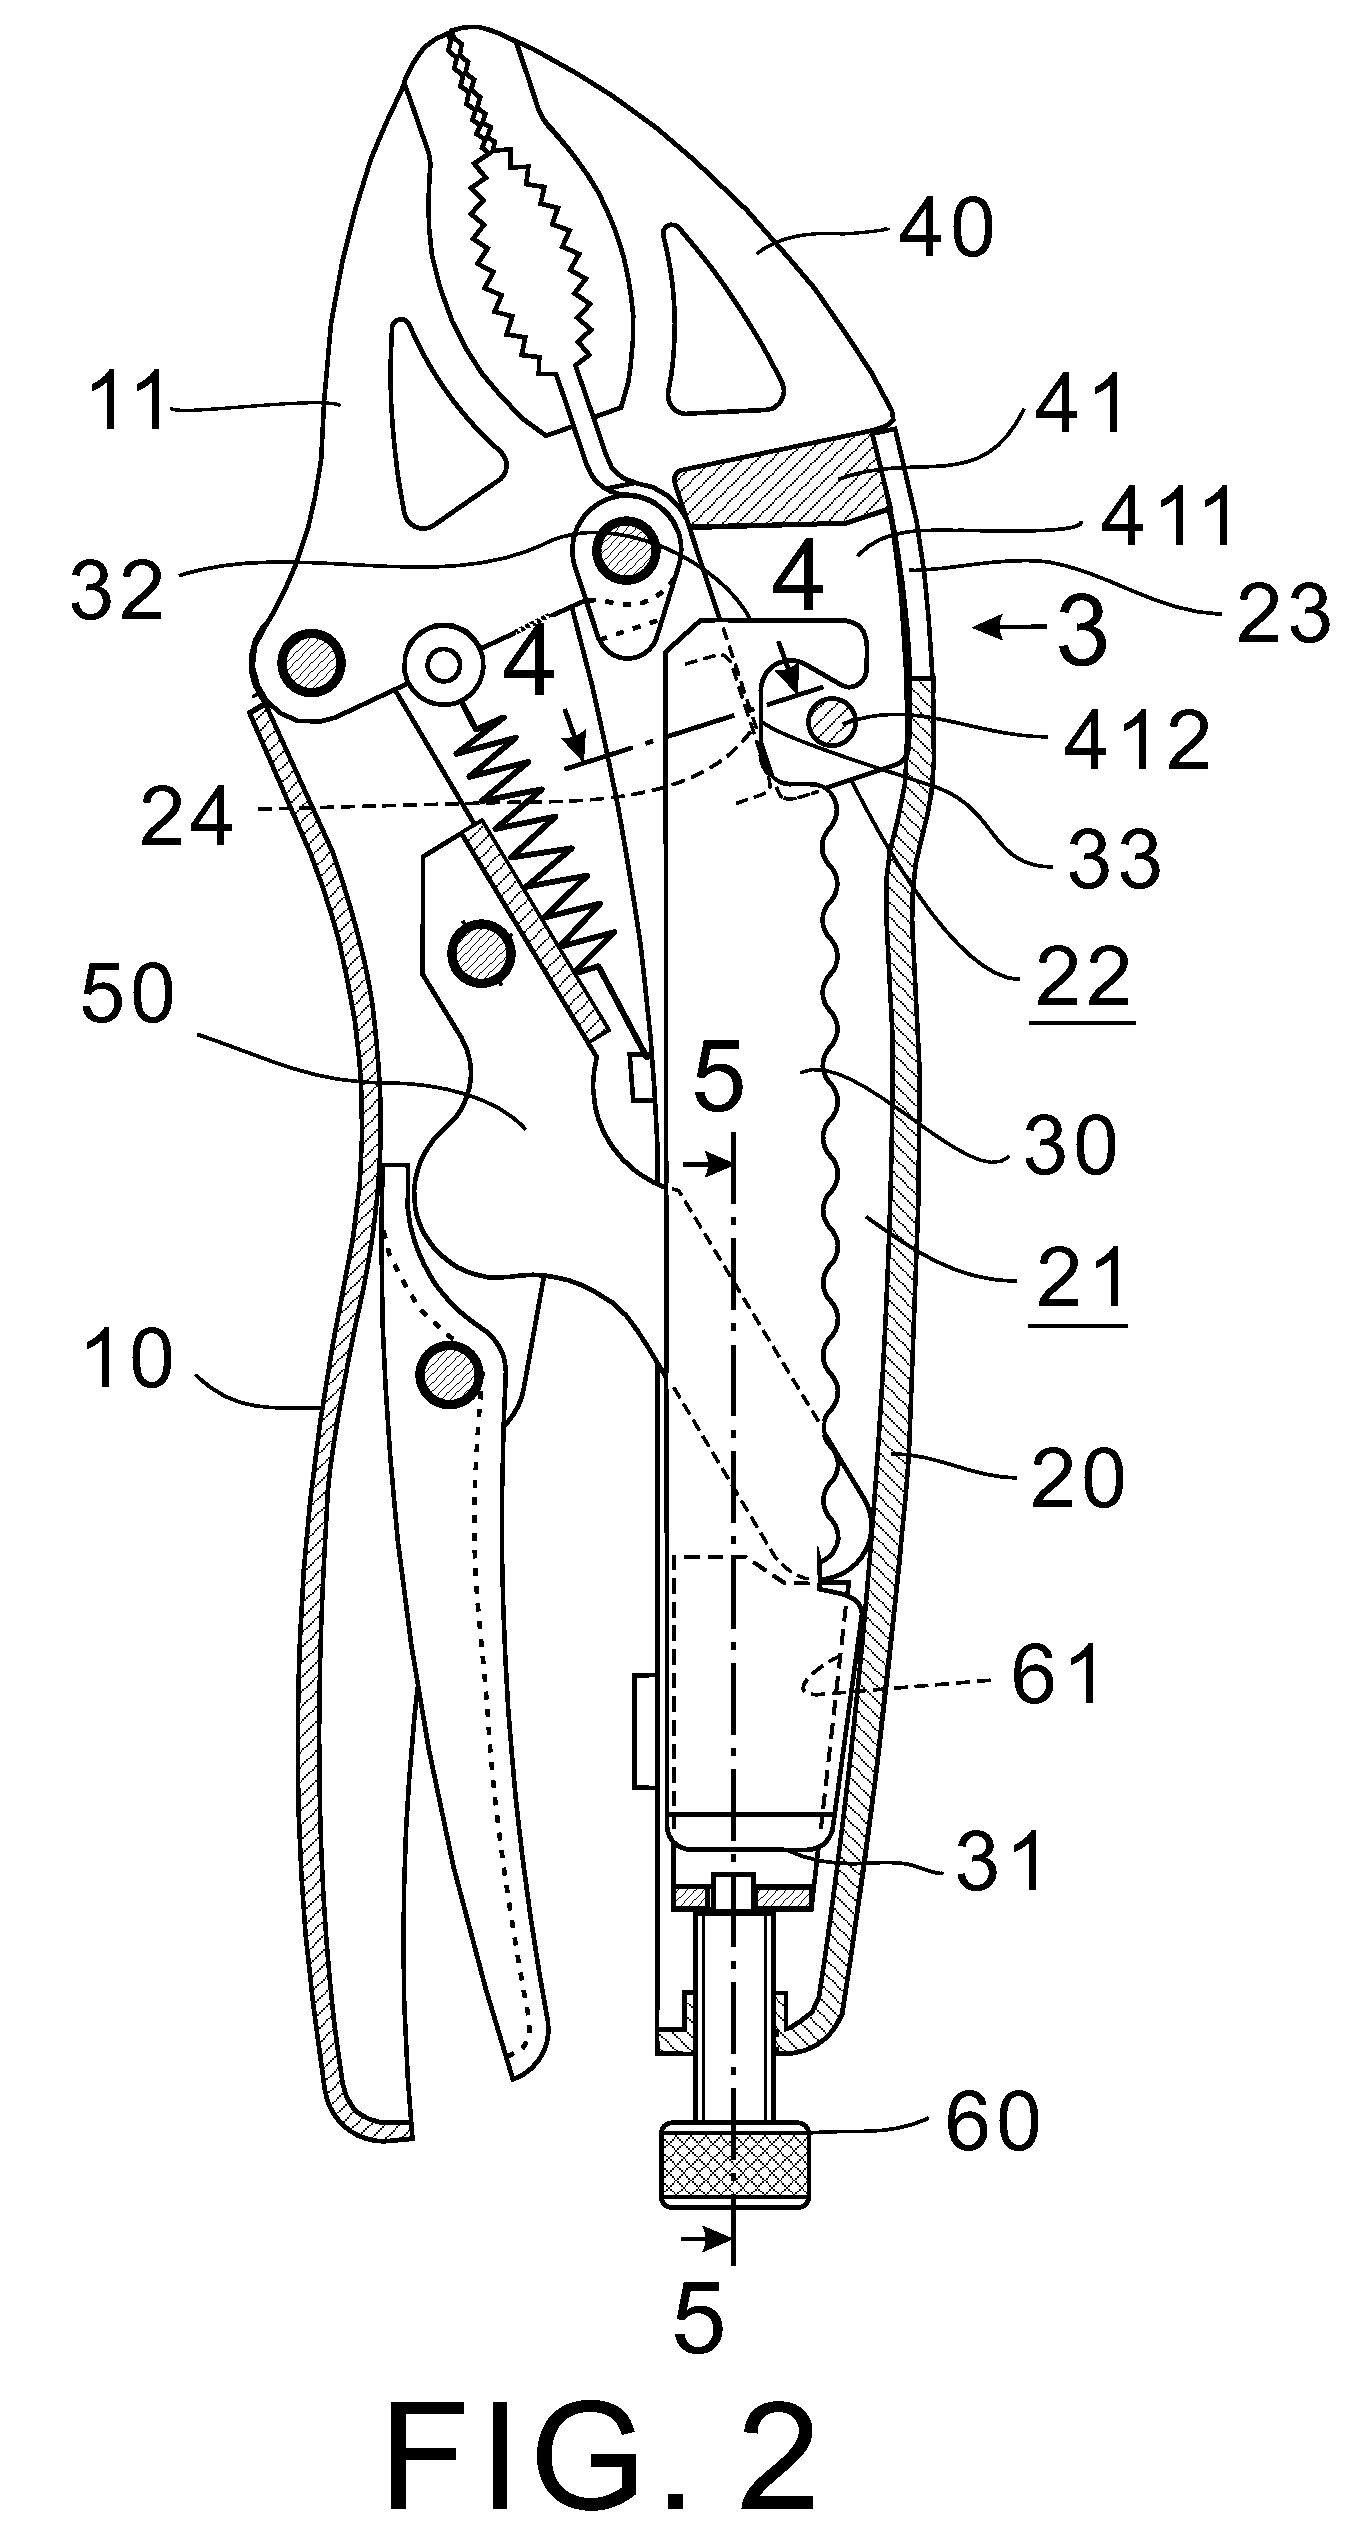 Locking pliers with retractable pivotal movable jaw